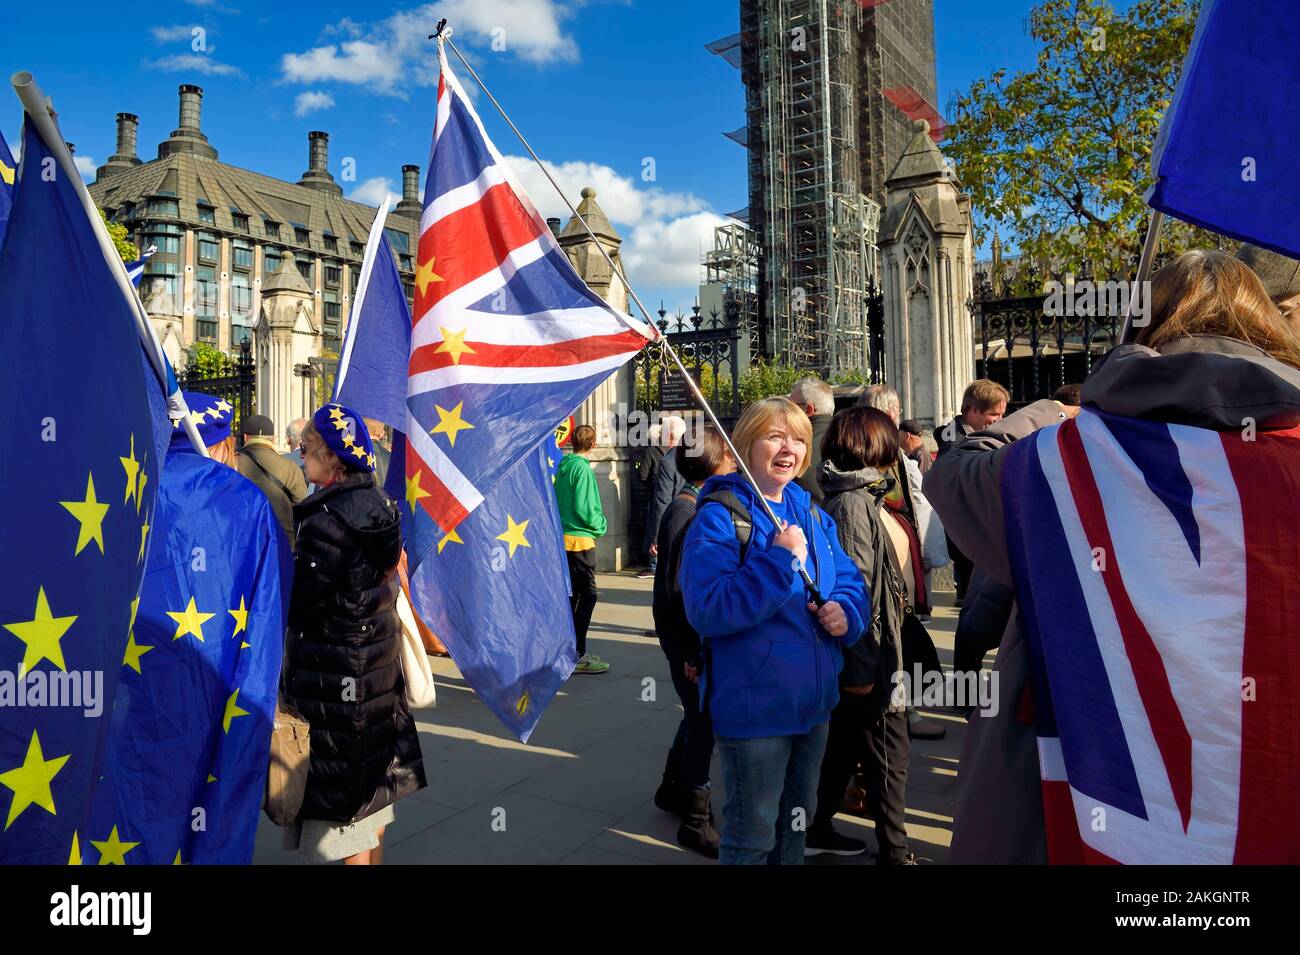 United Kingdom, London, City of Westminster, protest against Brexit in UK Parliament, European flag Stock Photo